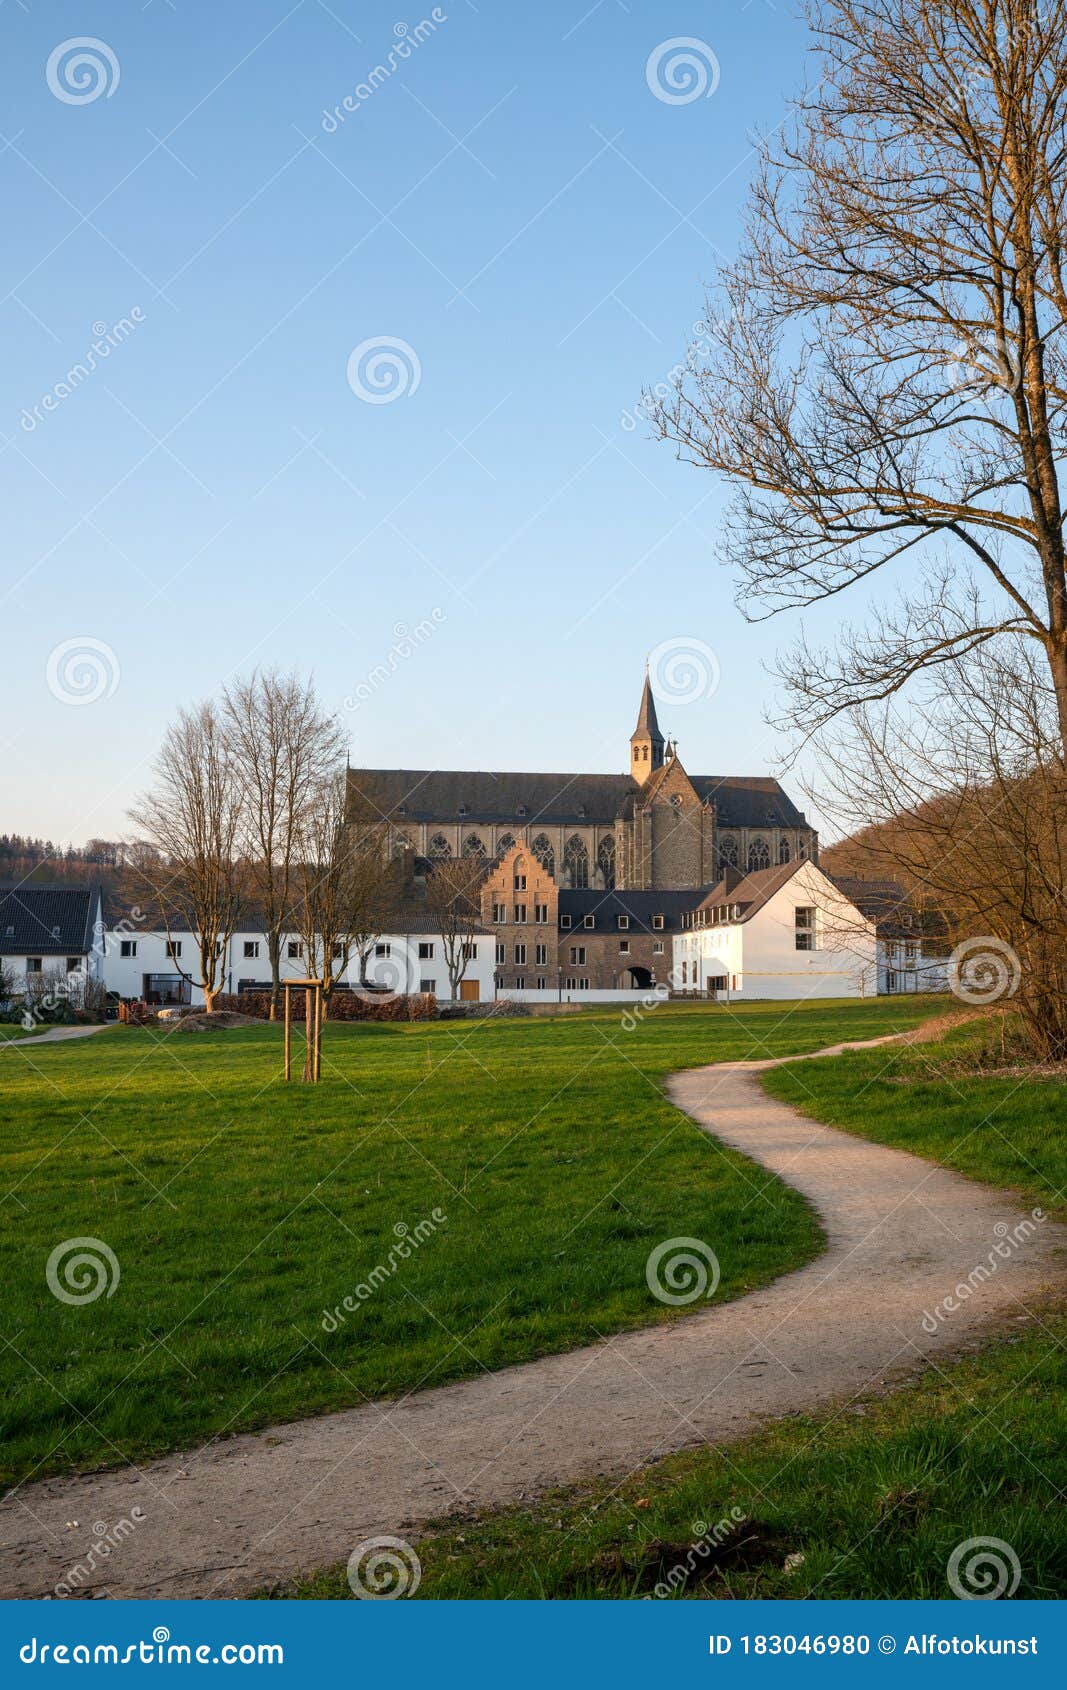 Altenberg Cathedral Bergisches Land Germany Editorial Image Image Of Christianity Destination 183046980